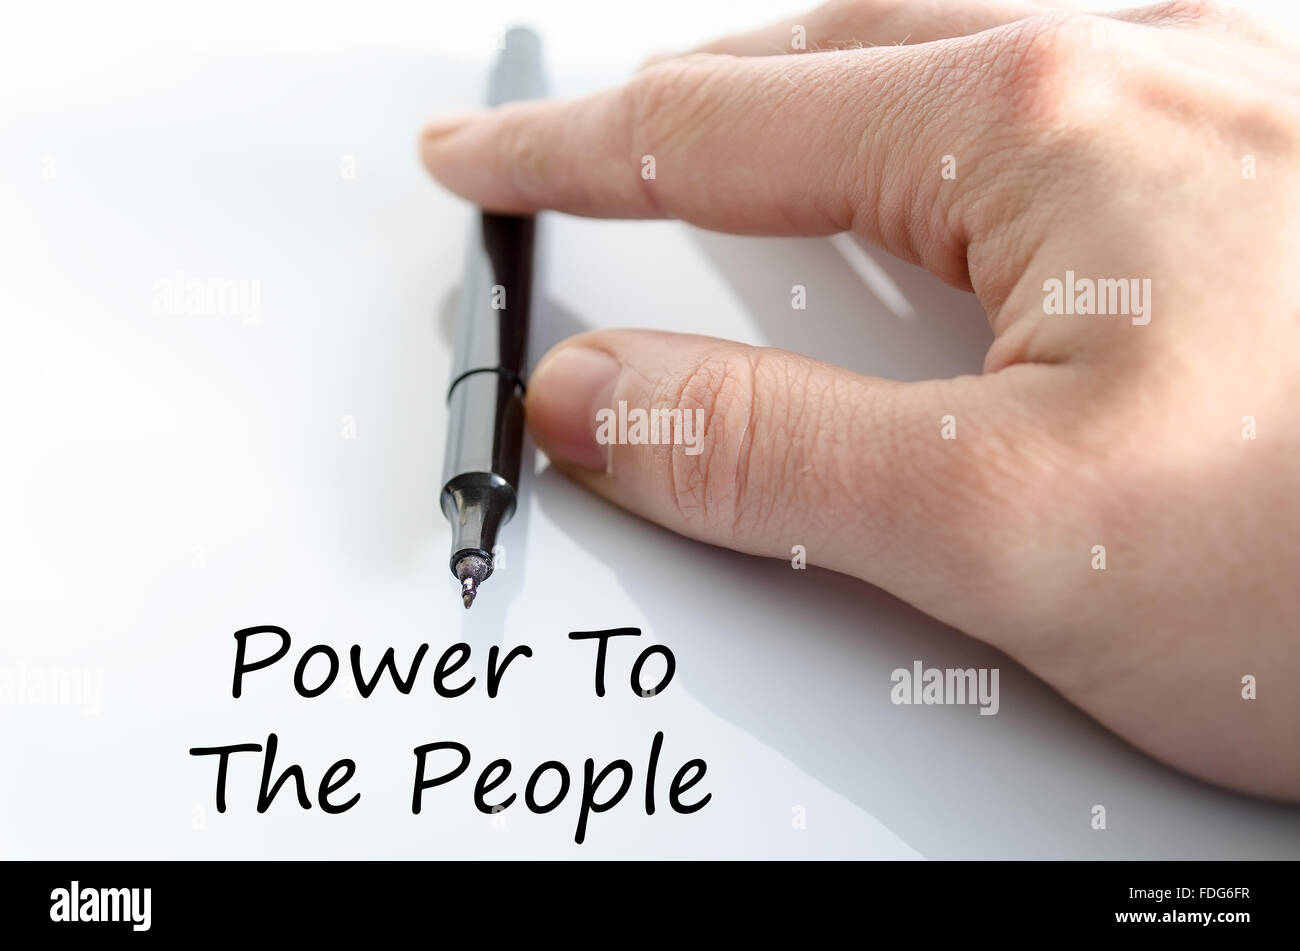 Power to the people text concept isolated over white background Stock Photo